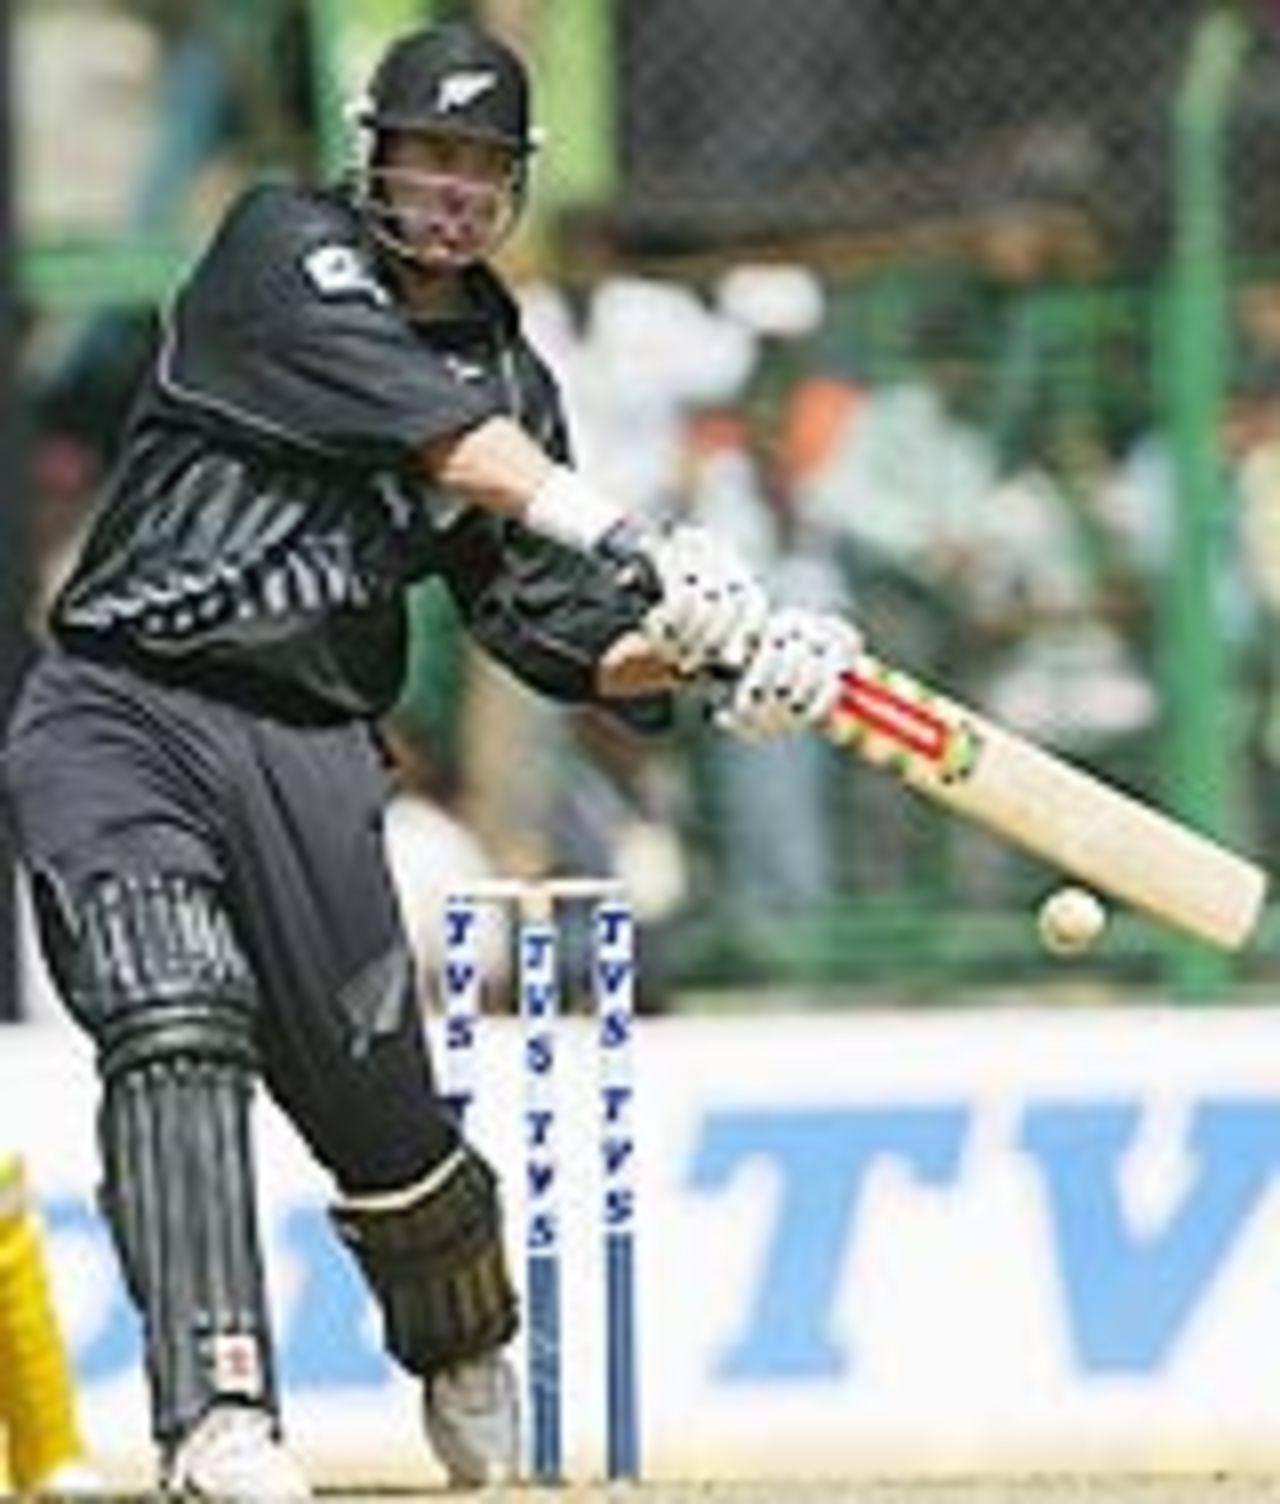 Jacob Oram cuts fiercely on his way to 81, Australia v New Zealand, 5th ODI, TVS Cup, Pune, 3rd November, 2003